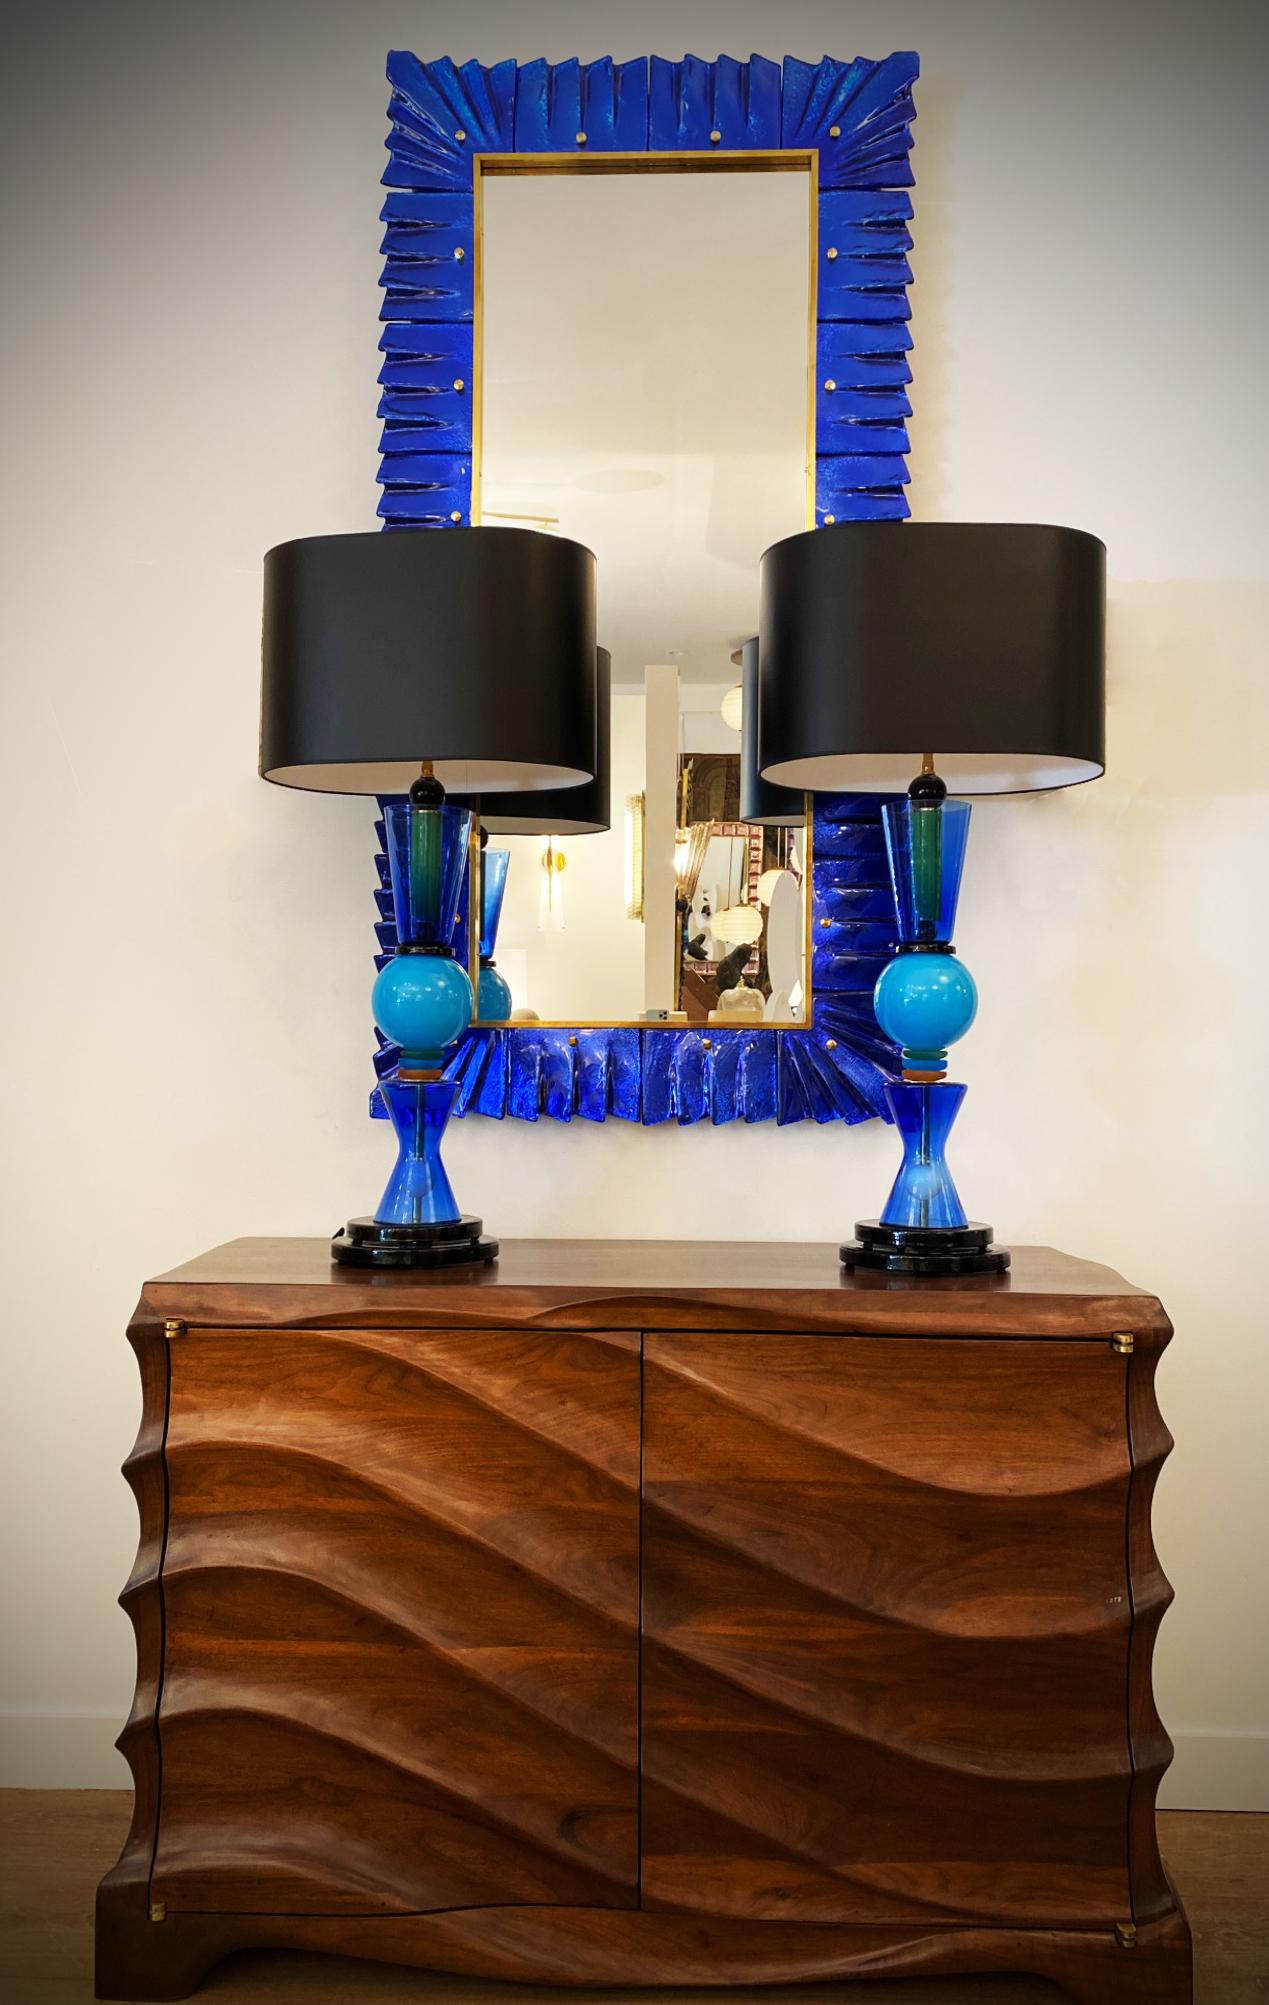 Large Murano cobalt blue glass mirror, in stock
Solid brass cabochon accents.
Glass texture and color are absolutely striking.
Brass surrounding gallery
Can be hung vertical or horizontal.
Pair available now
Priced individually
Located in our